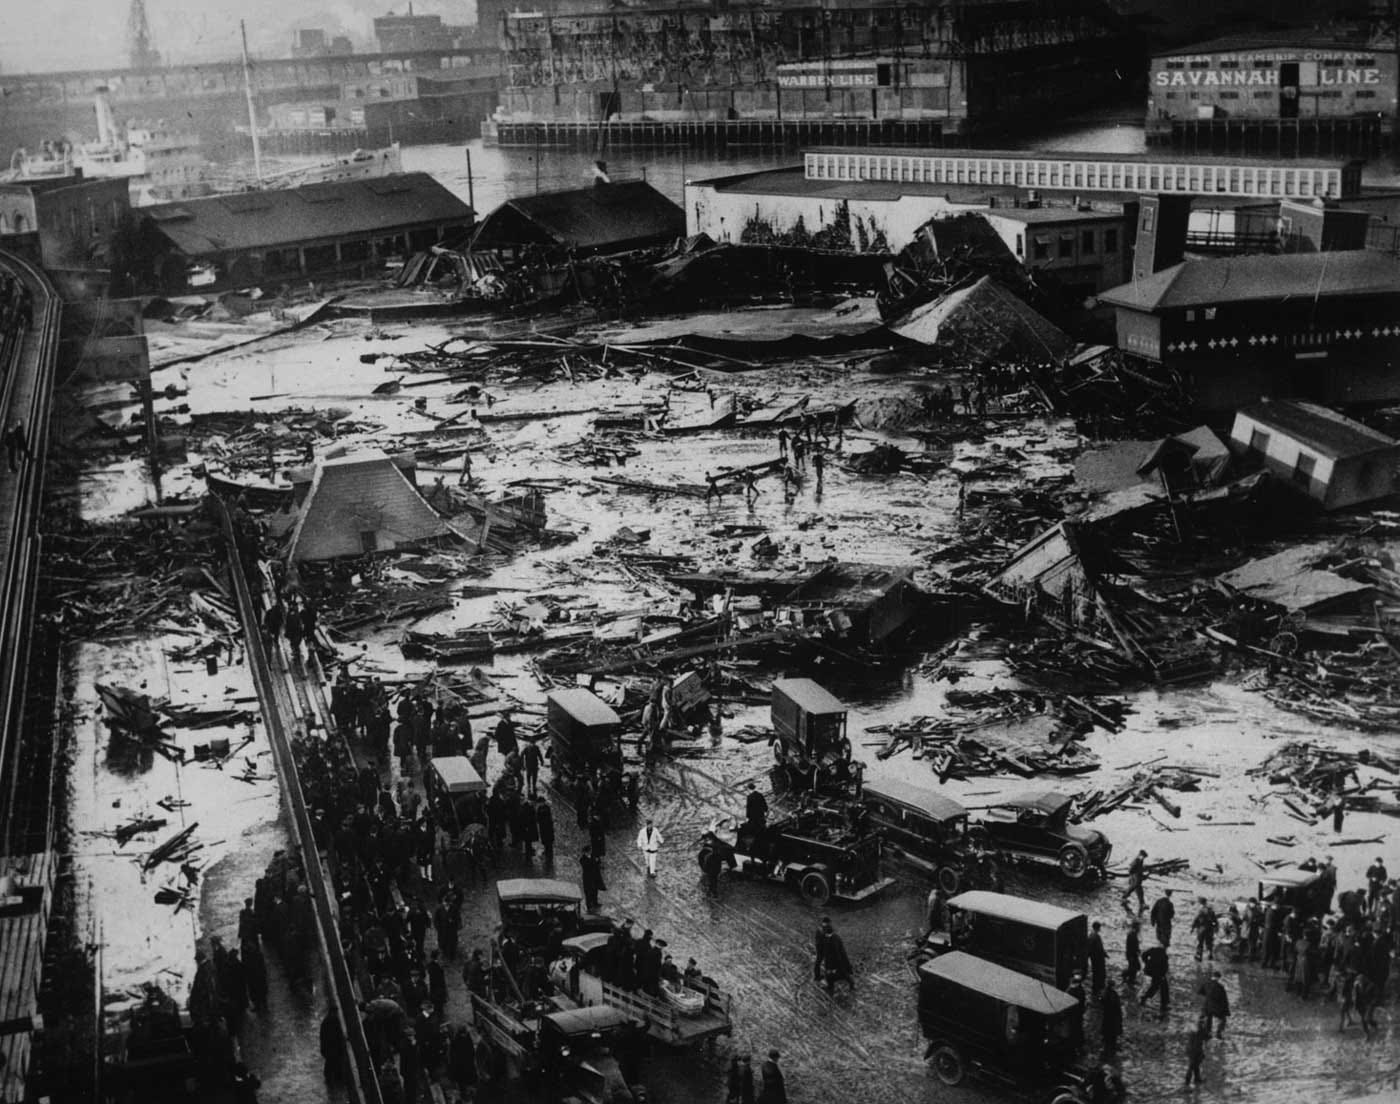 Floods of Molasses and Racism In 1919 Boston